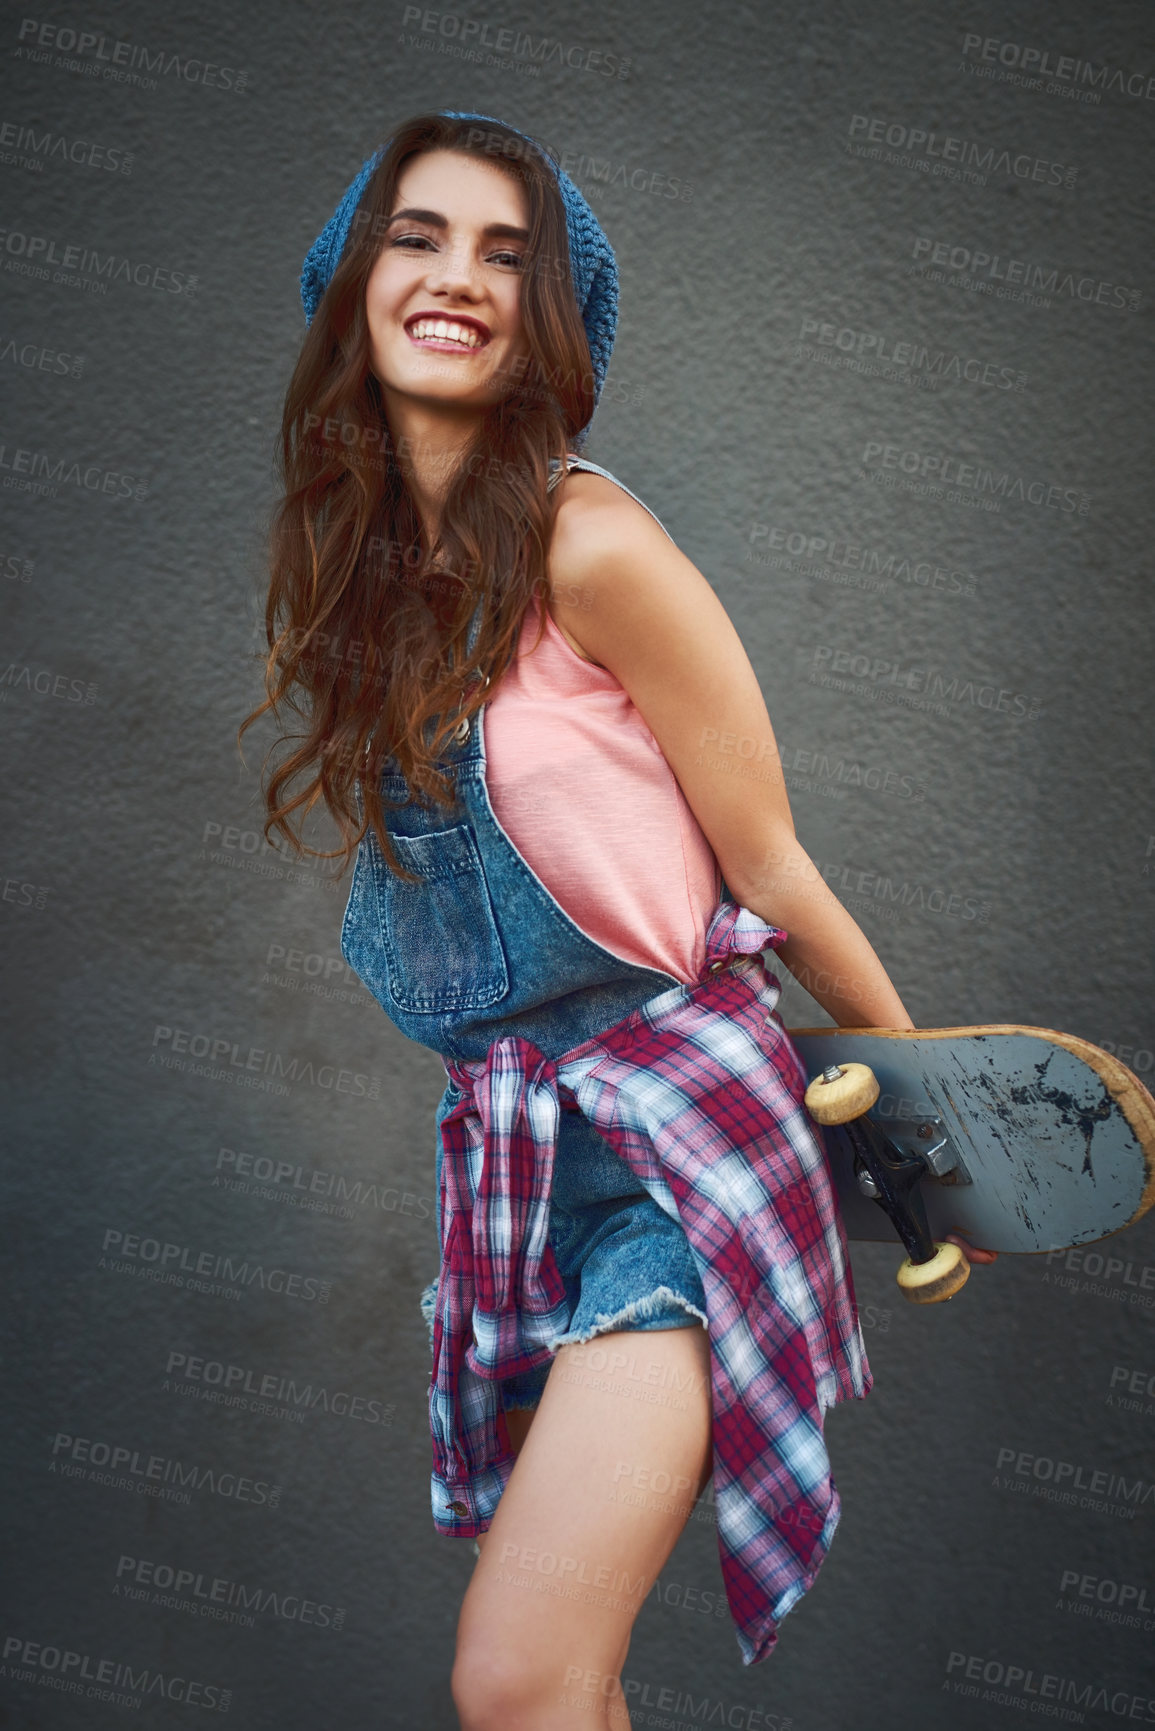 Buy stock photo Shot of an attractive young female skater holding a skateboard behind her back while standing against a grey background